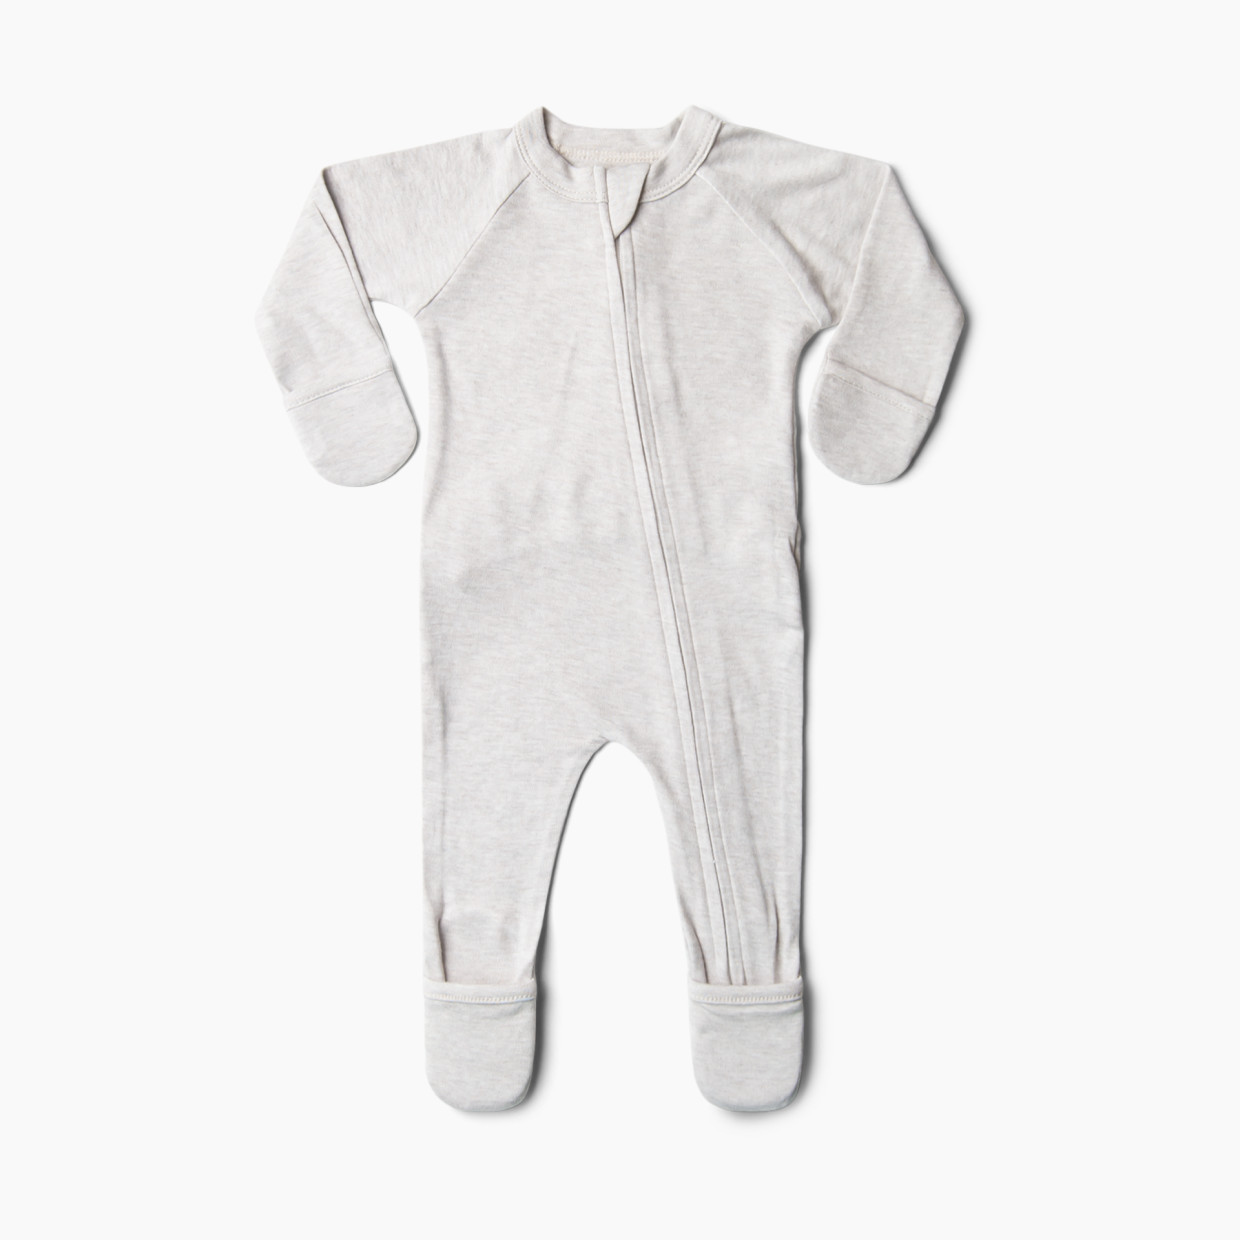 Goumi Kids Grow With You Footie - Loose Fit - Storm Gray, 0-3 M.